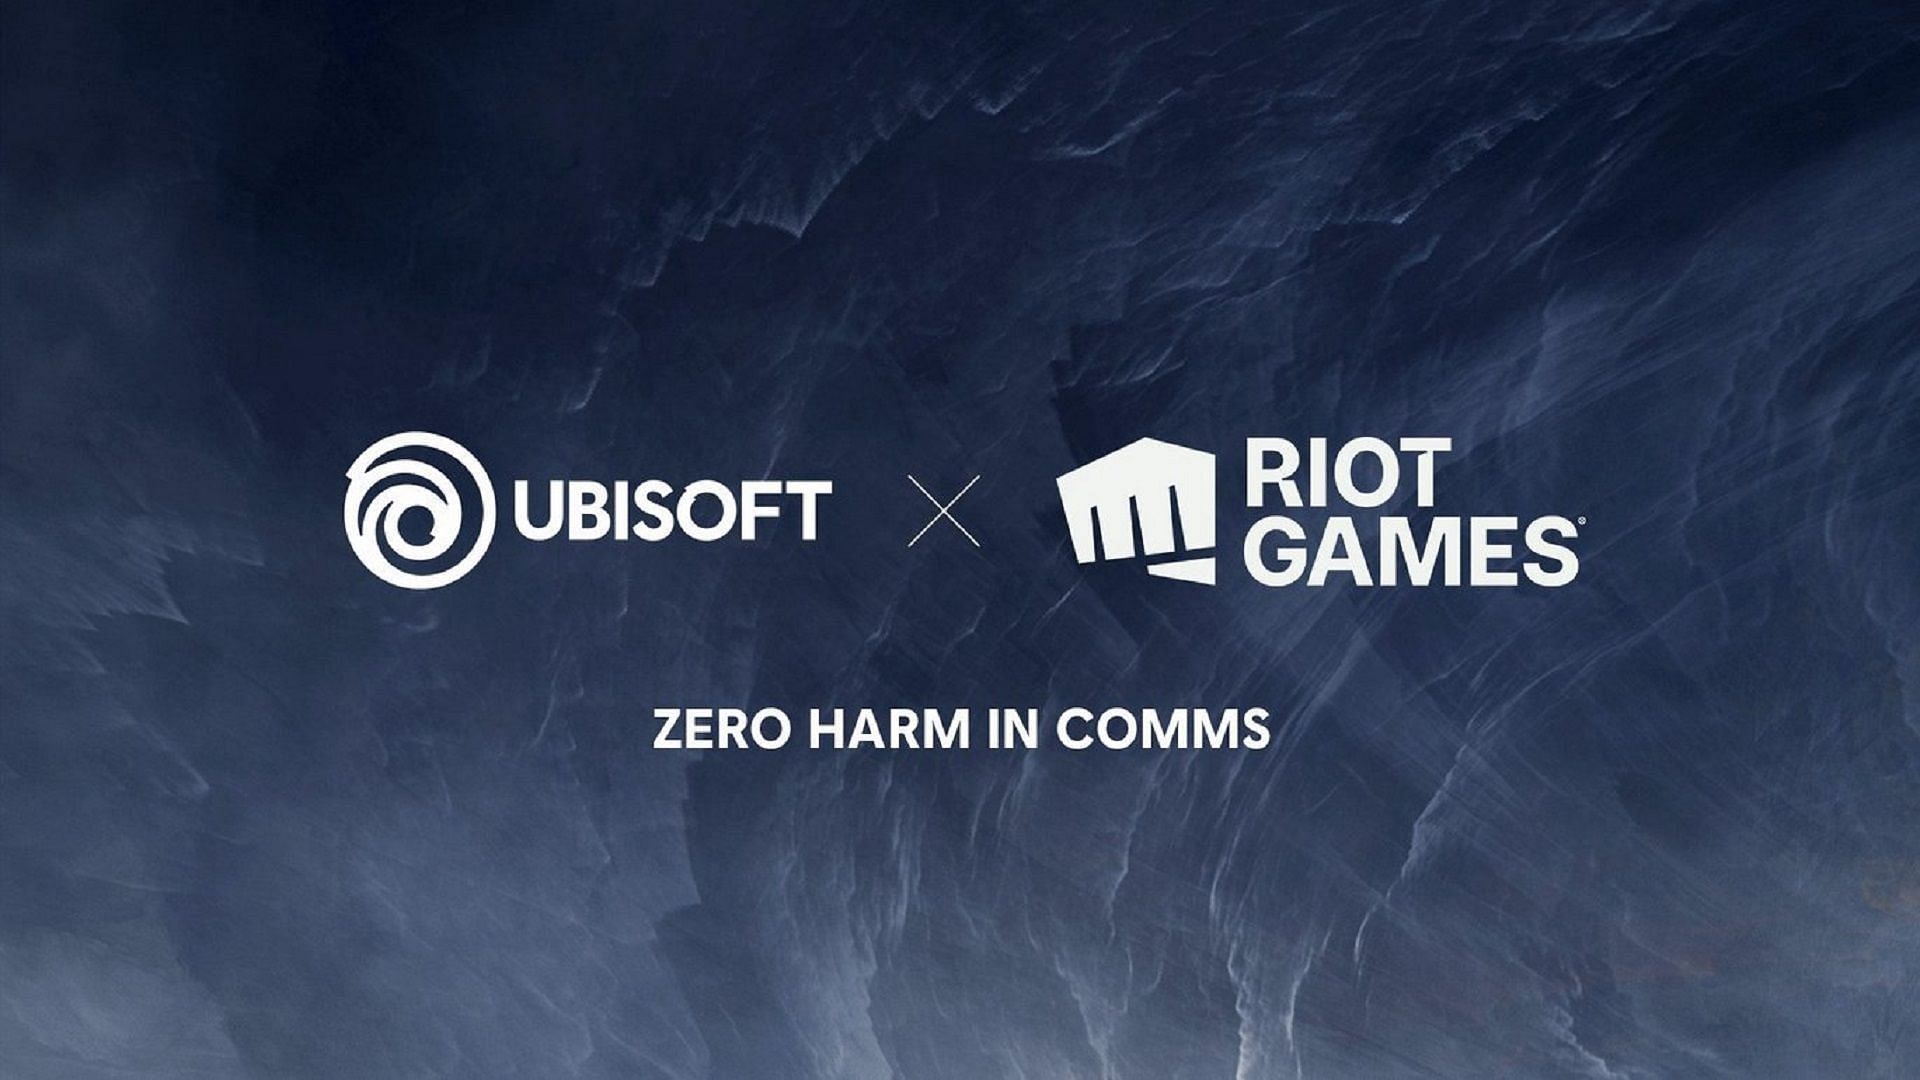 Ubisoft and Riot Games join forces to fight disruptive behaviors in games (Image via Ubisoft)